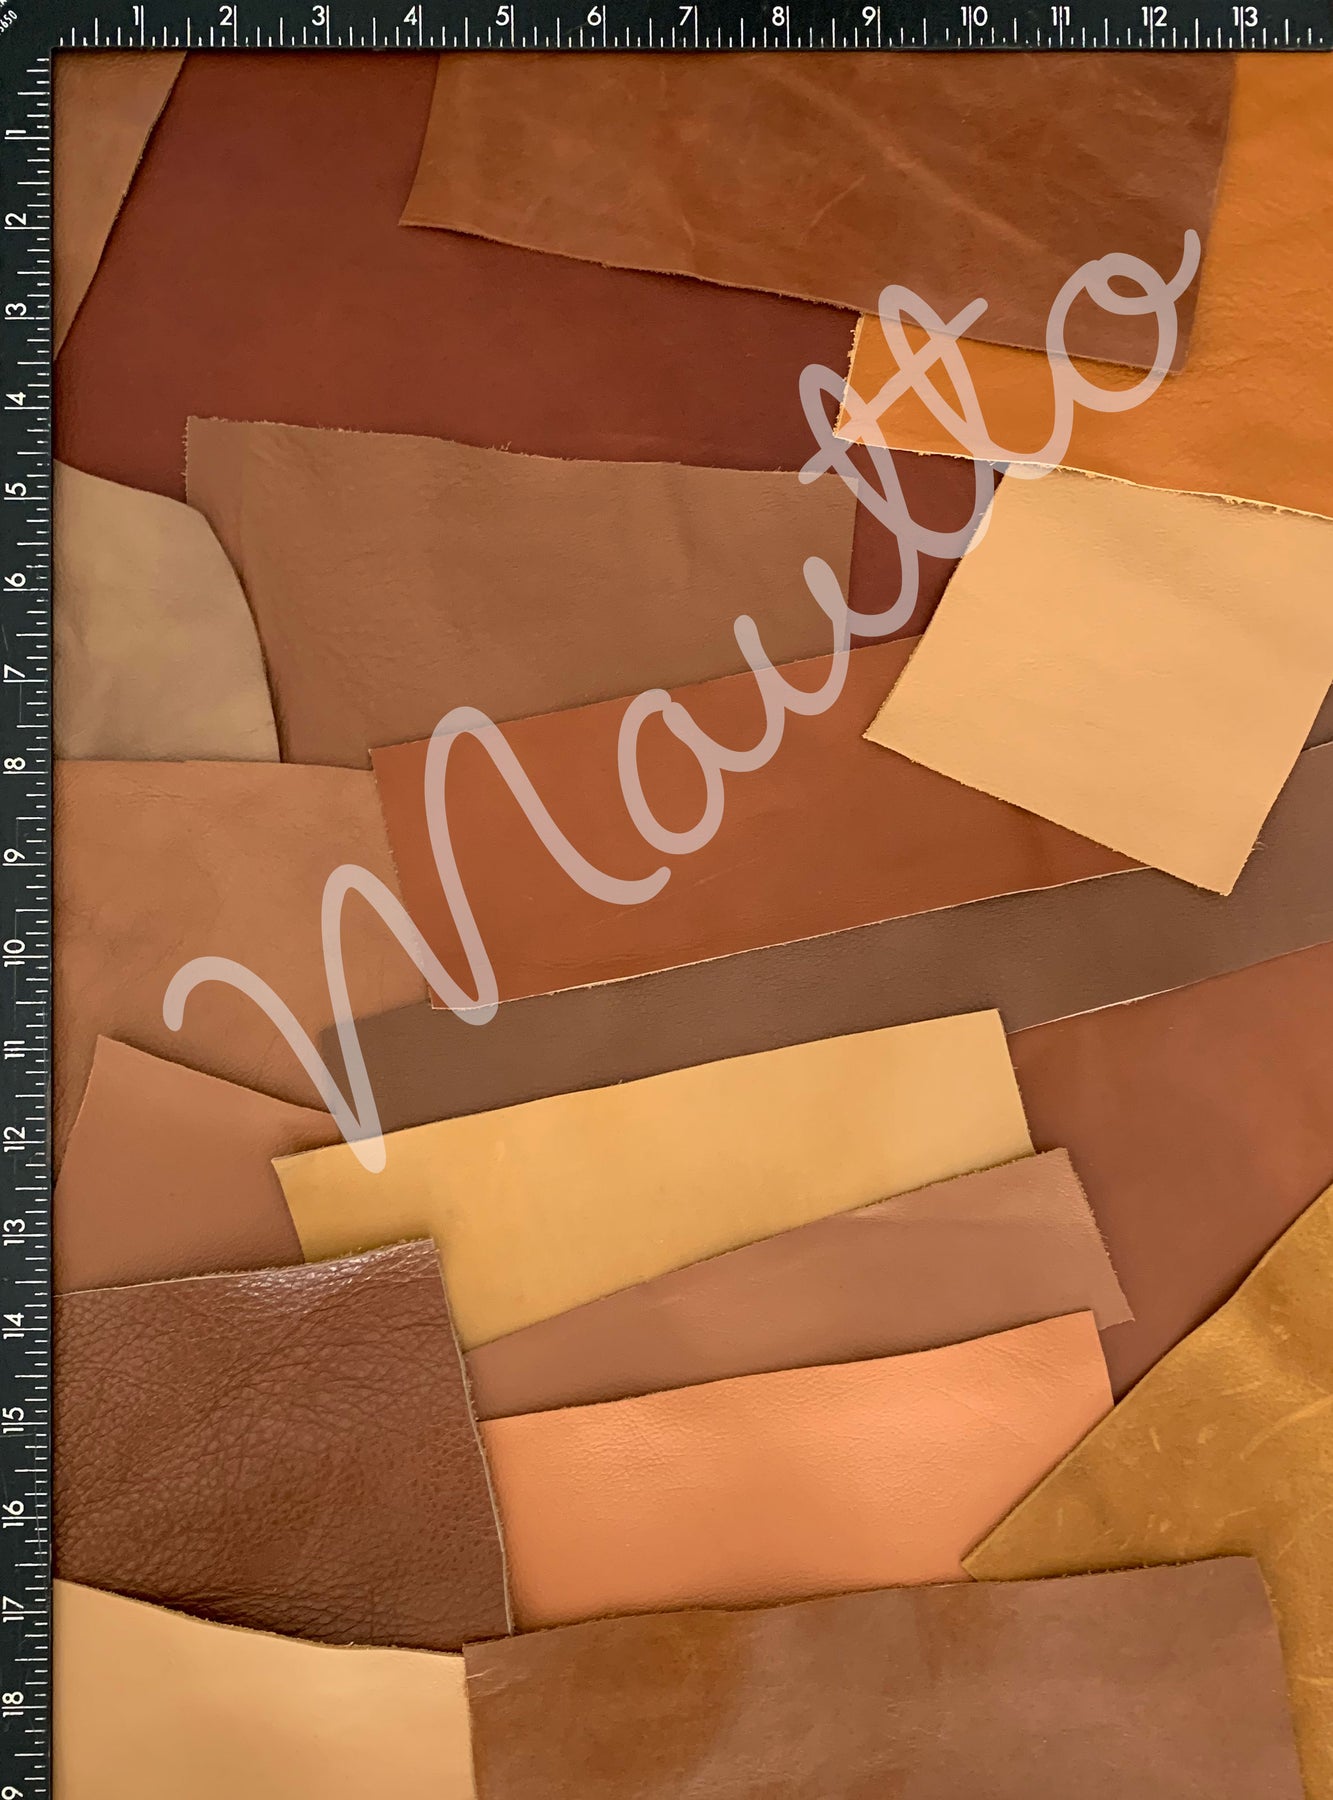 Tan Leather Pieces - 1 Pound Bag of Scraps & Remnants for Crafts